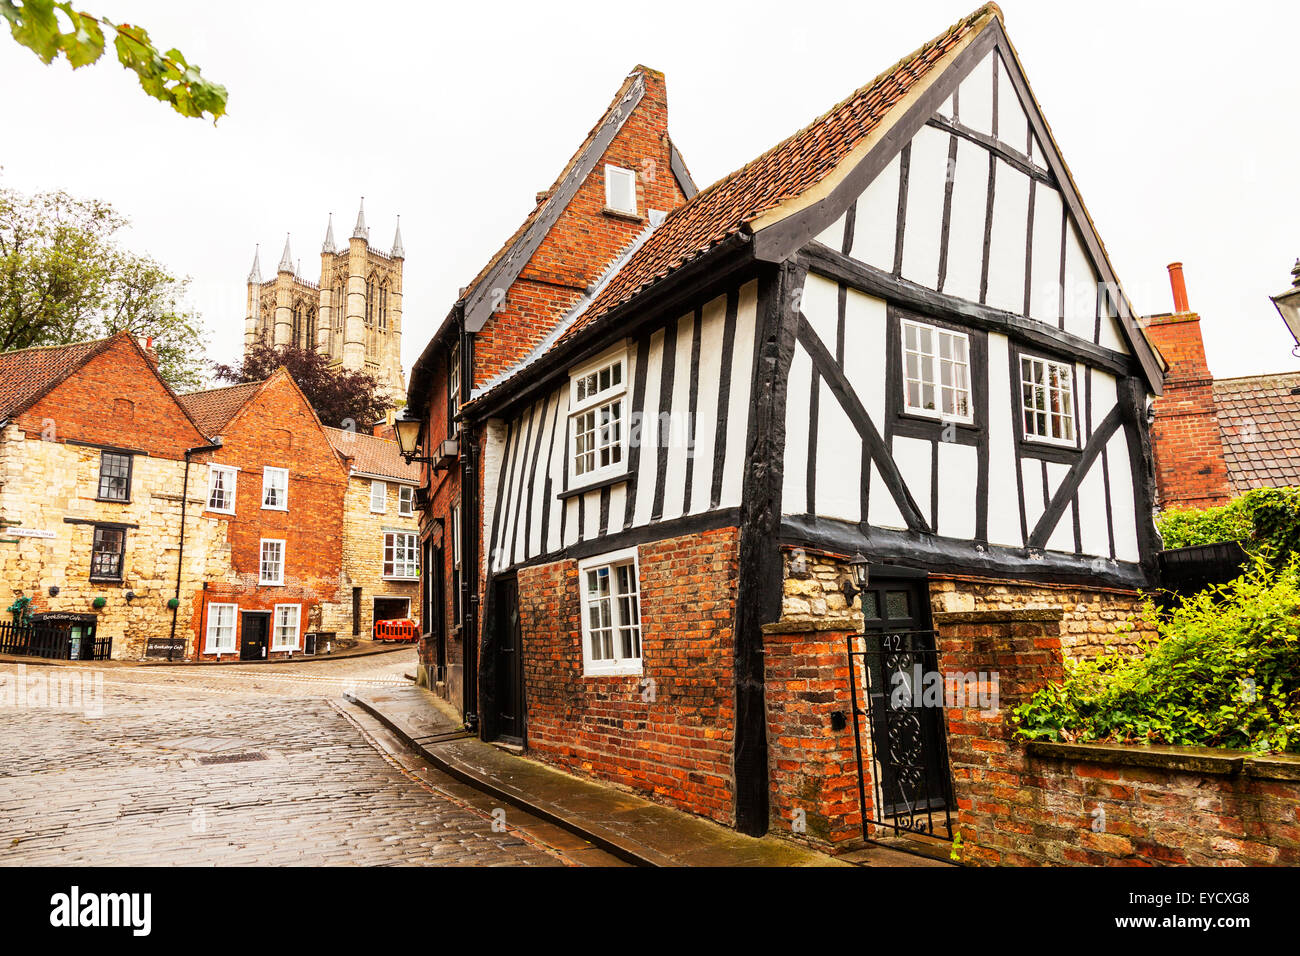 Lincoln city Cathedral Michaelgate tudor timbered house medieval crooked construction architecture UK England Lincolnshire capital Stock Photo